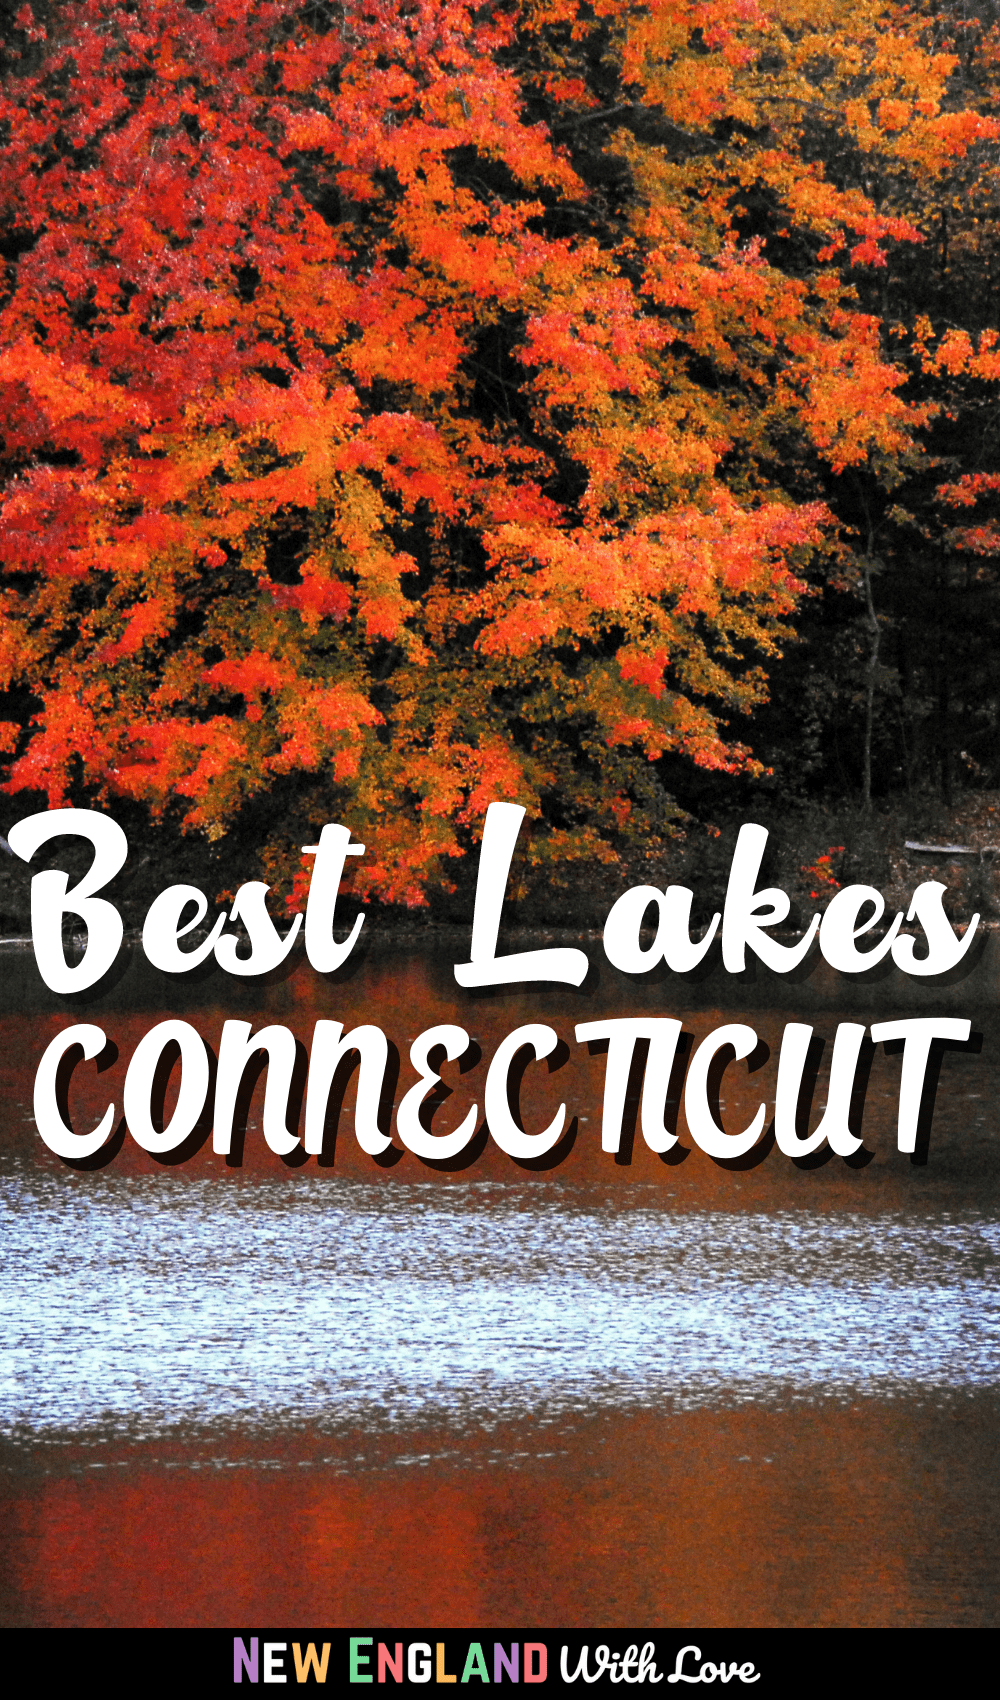 A close up of a sign reading "Best Lakes Connecticut"